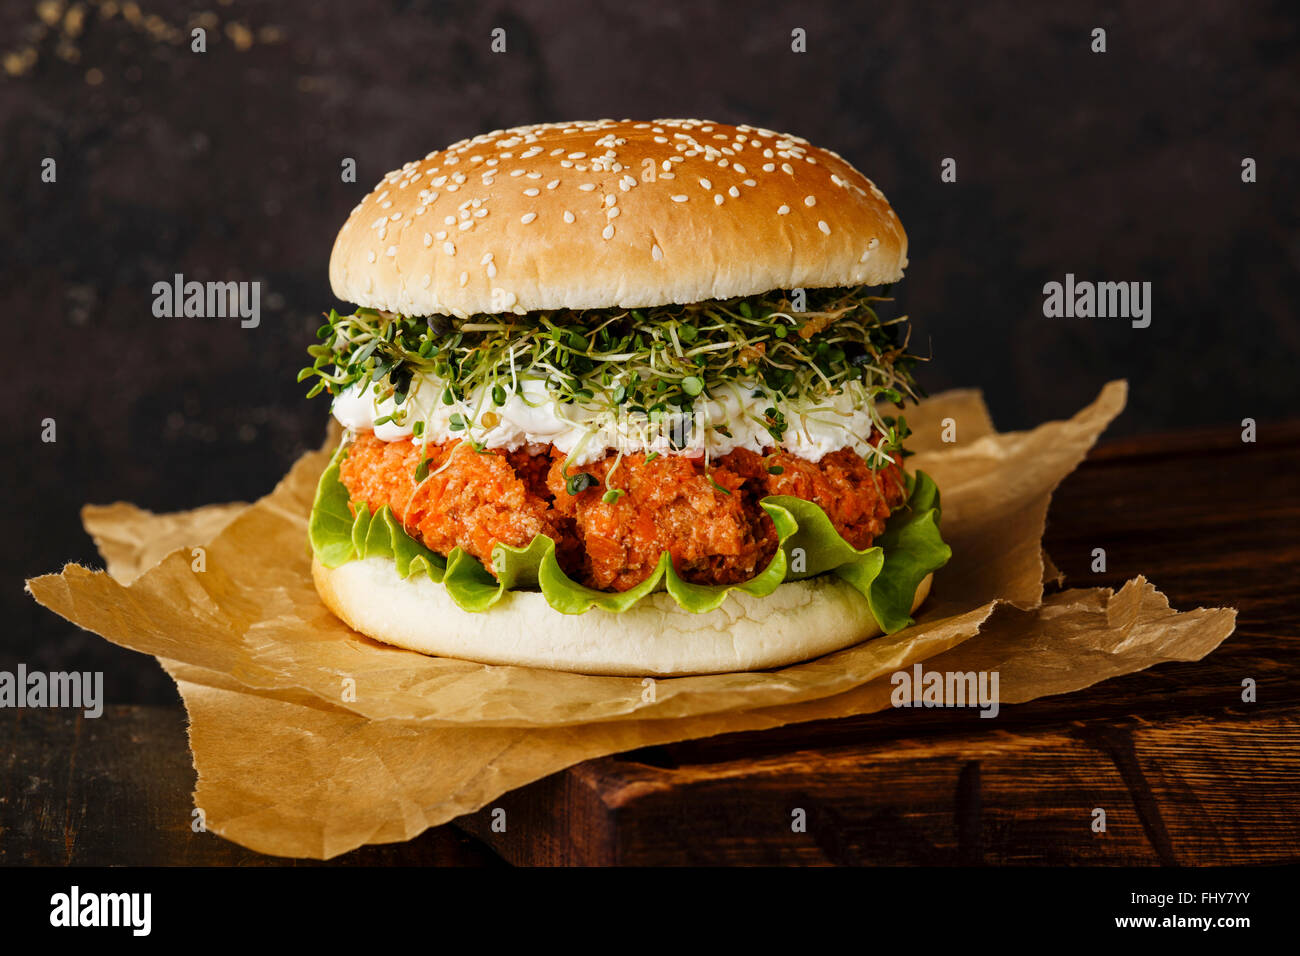 Carrot burger with clover sprouts on dark background Stock Photo